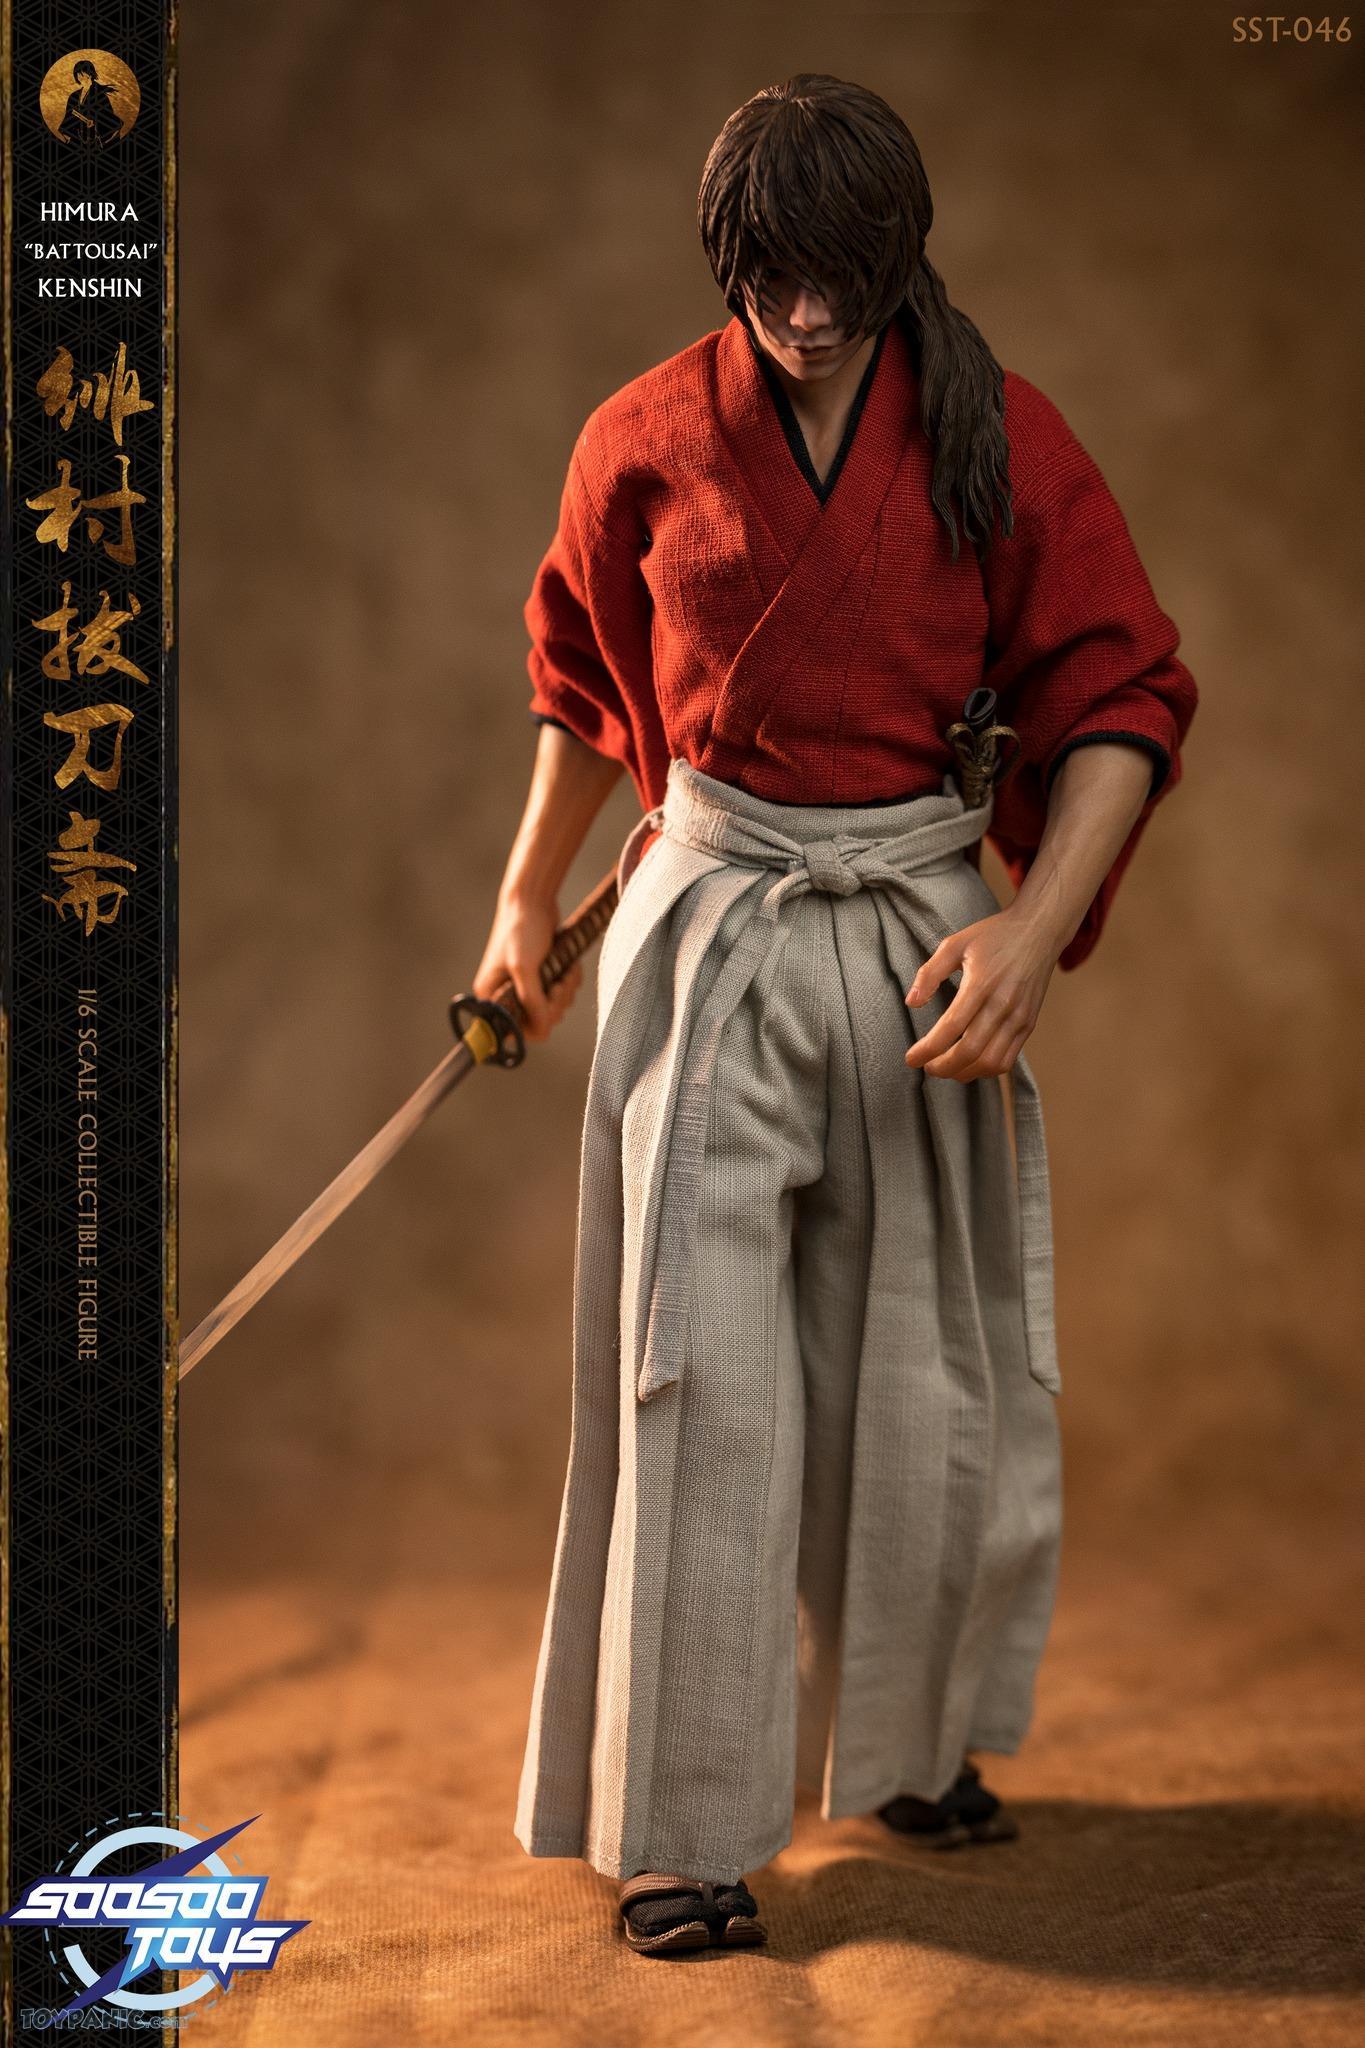 japanese - NEW PRODUCT: 1/6 scale Rurouni Kenshin Collectible Figure from SooSooToys 712202251232PM_5173529